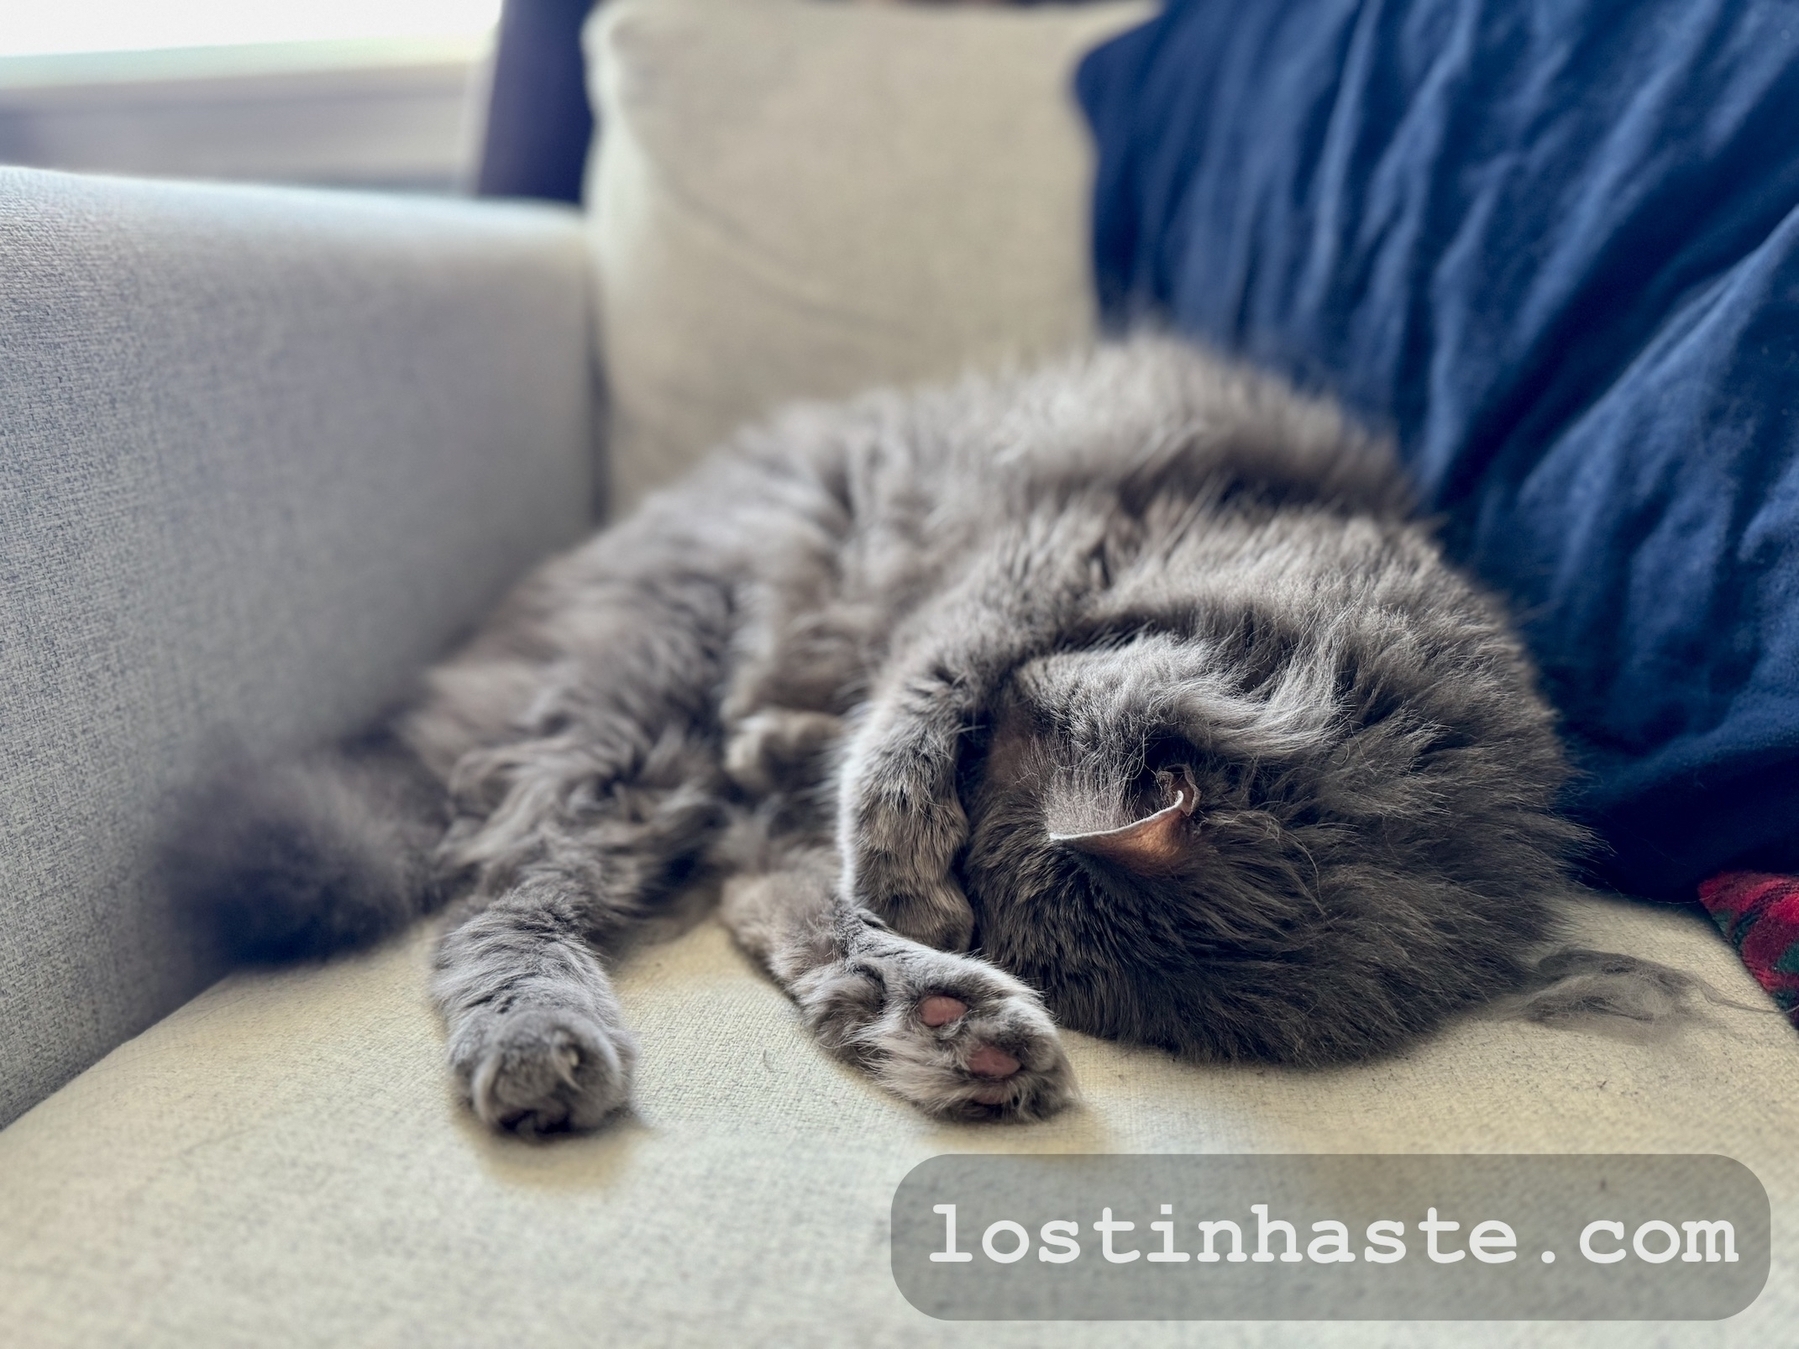 A fluffy gray cat is curled up sleeping on a couch beside a blue pillow, with the text 'lostinhaste.com' overlaid at the bottom.